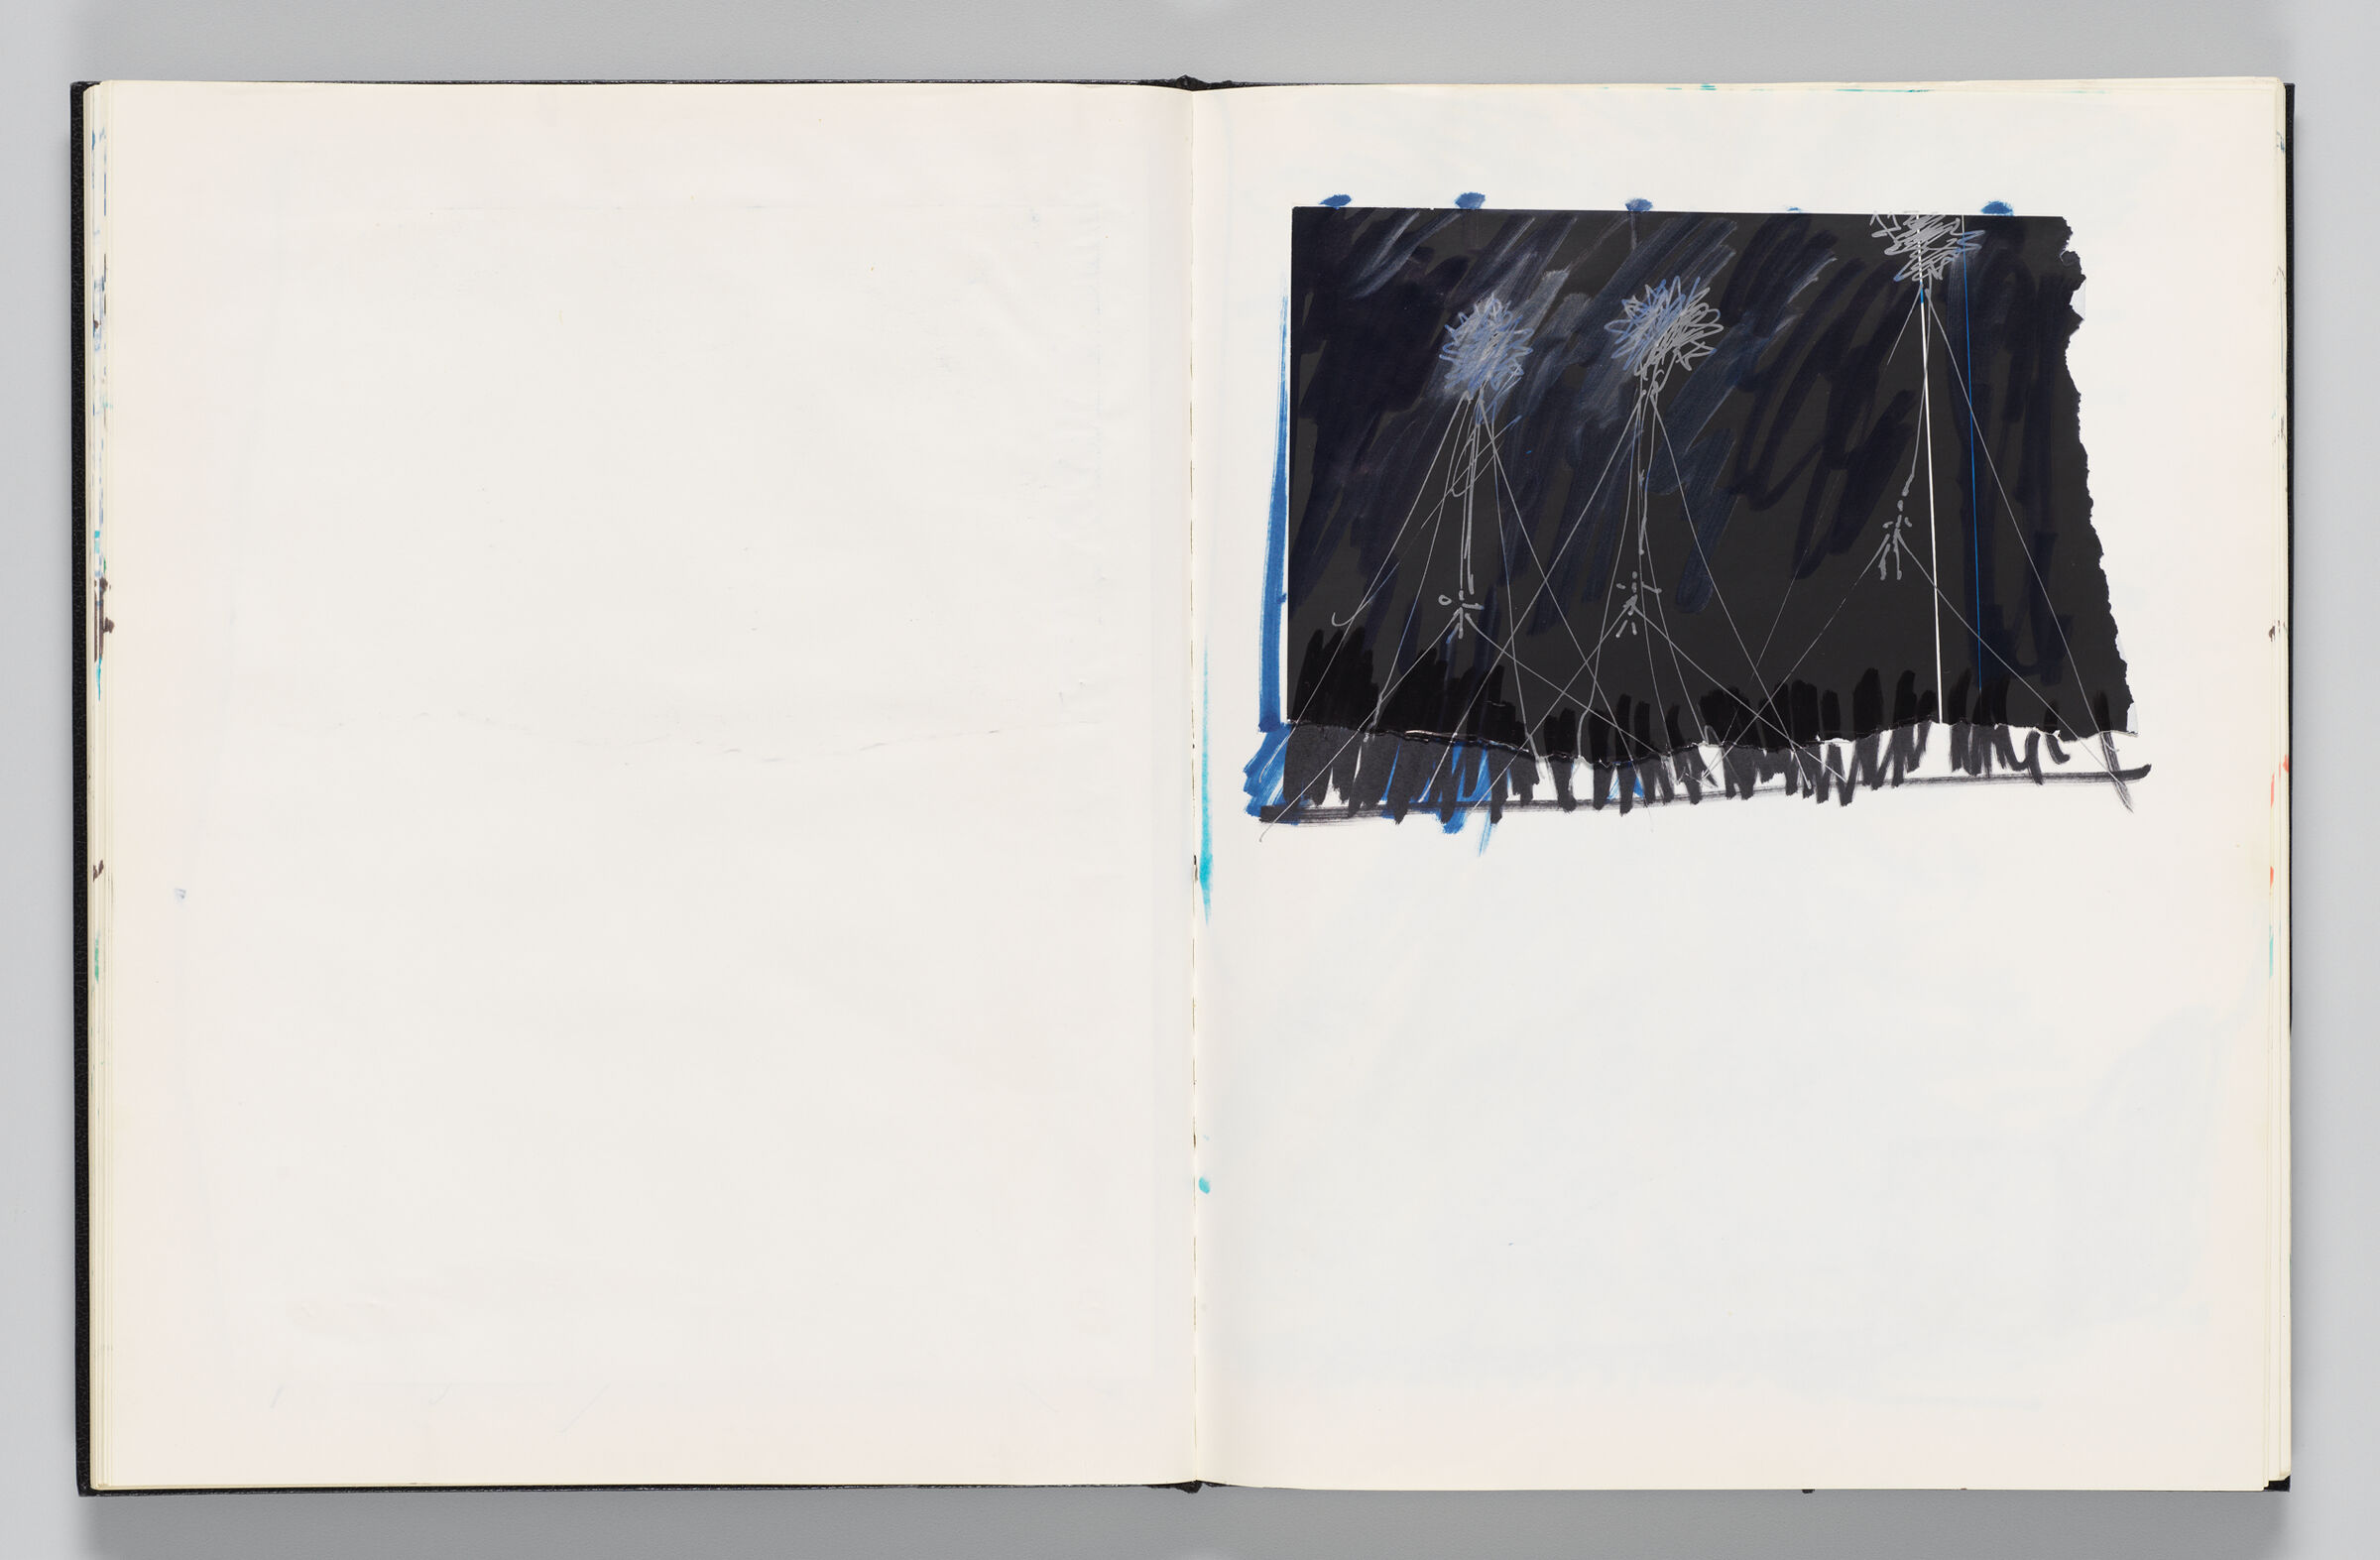 Untitled (Blank, Left Page); Untitled (Inflatables Attached To Figures On Pasted-In Paper, Right Page)